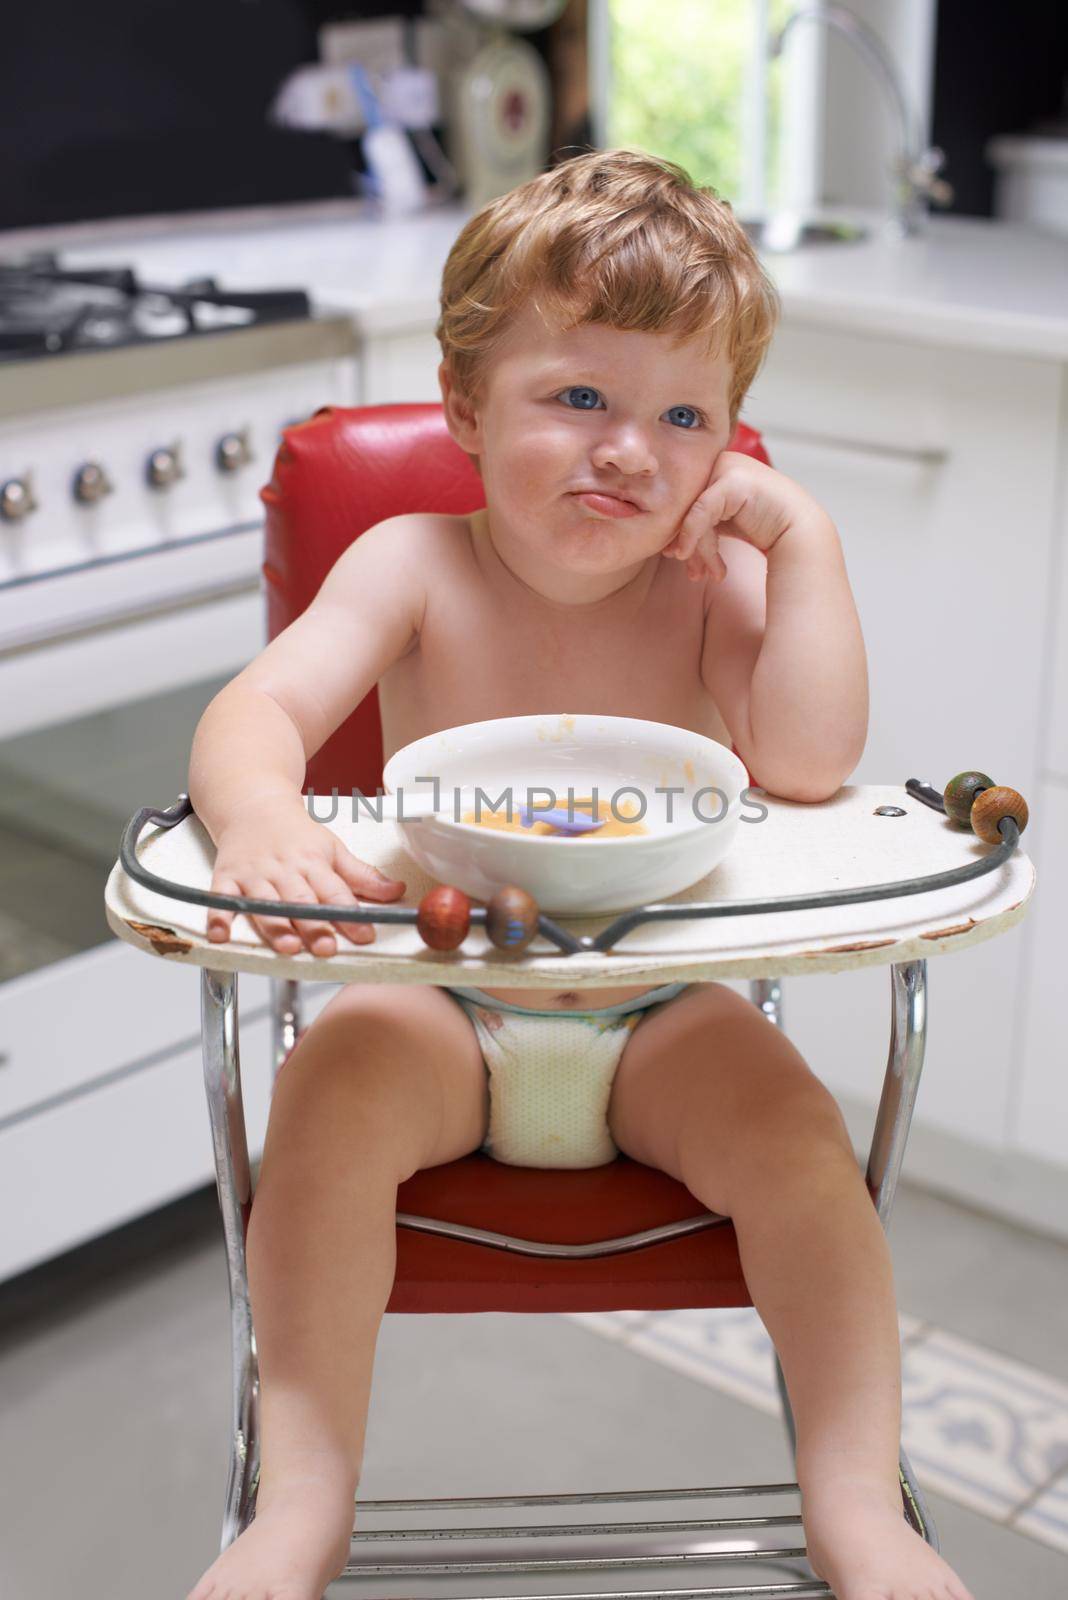 I wish someone would let me out...A bored toddler sitting in a high chair. by YuriArcurs